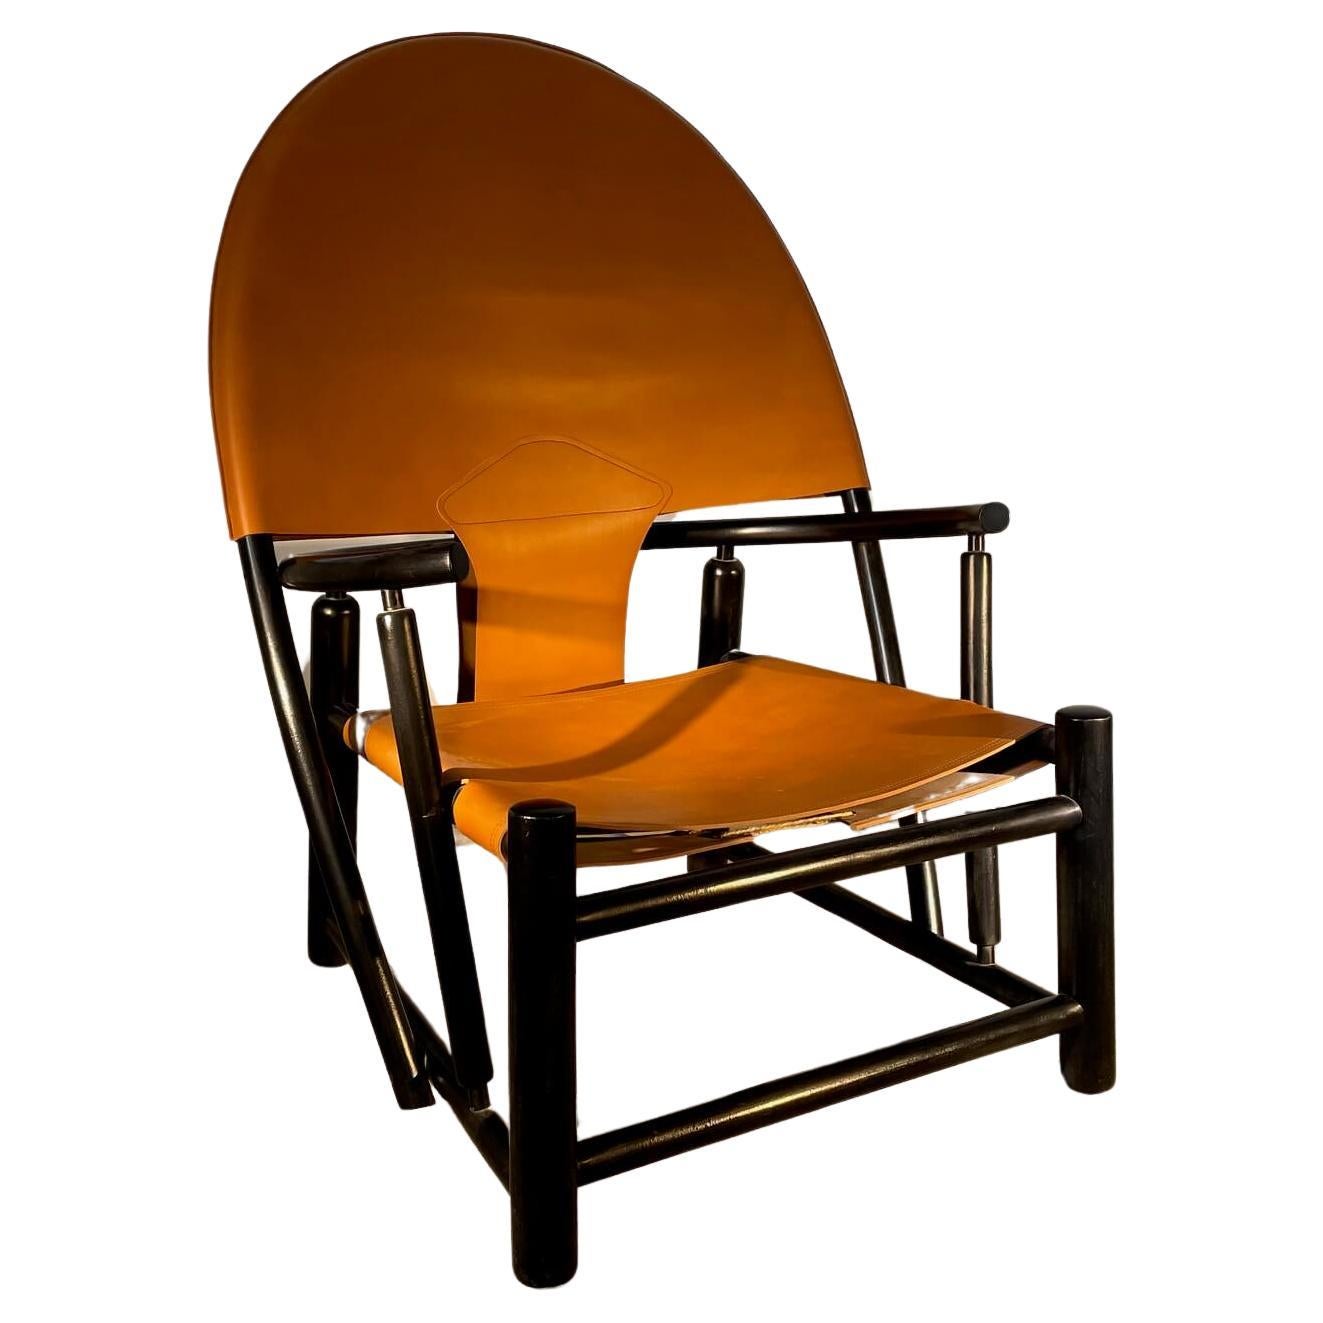 Werther Toffoloni Piero Palange Armchair For Sale